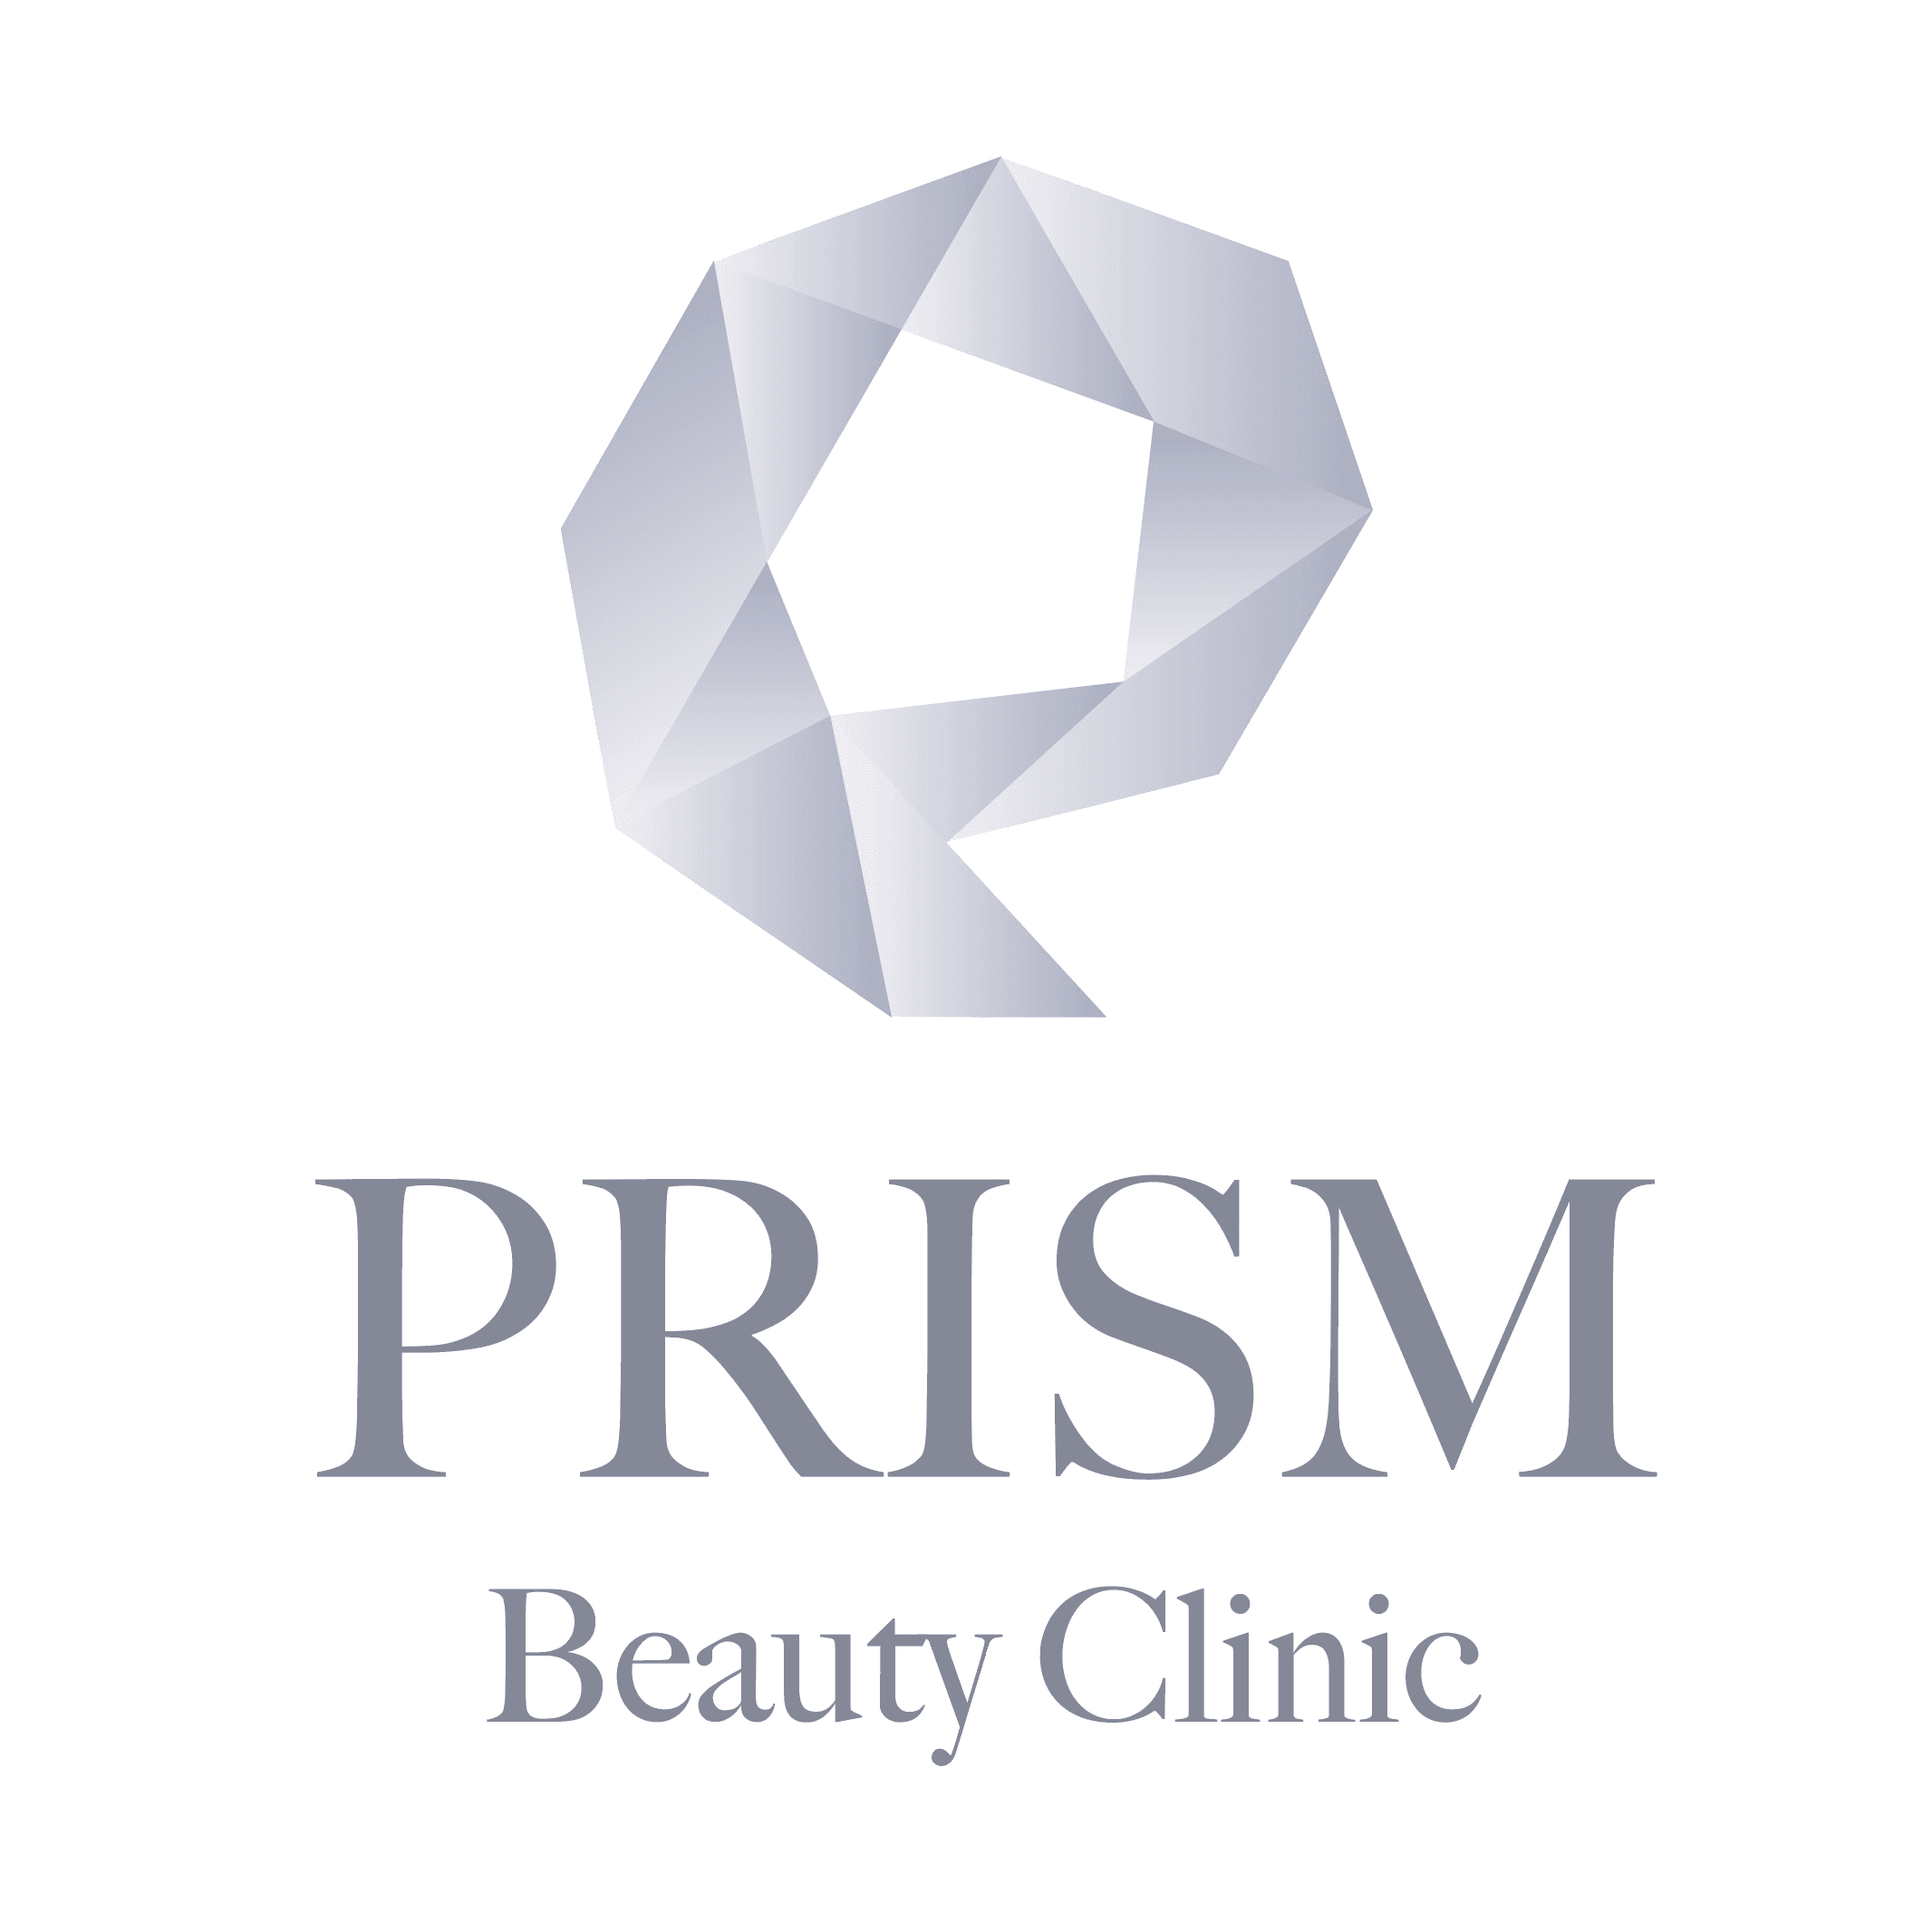 PRISM Beauty Clinicのロゴ画像